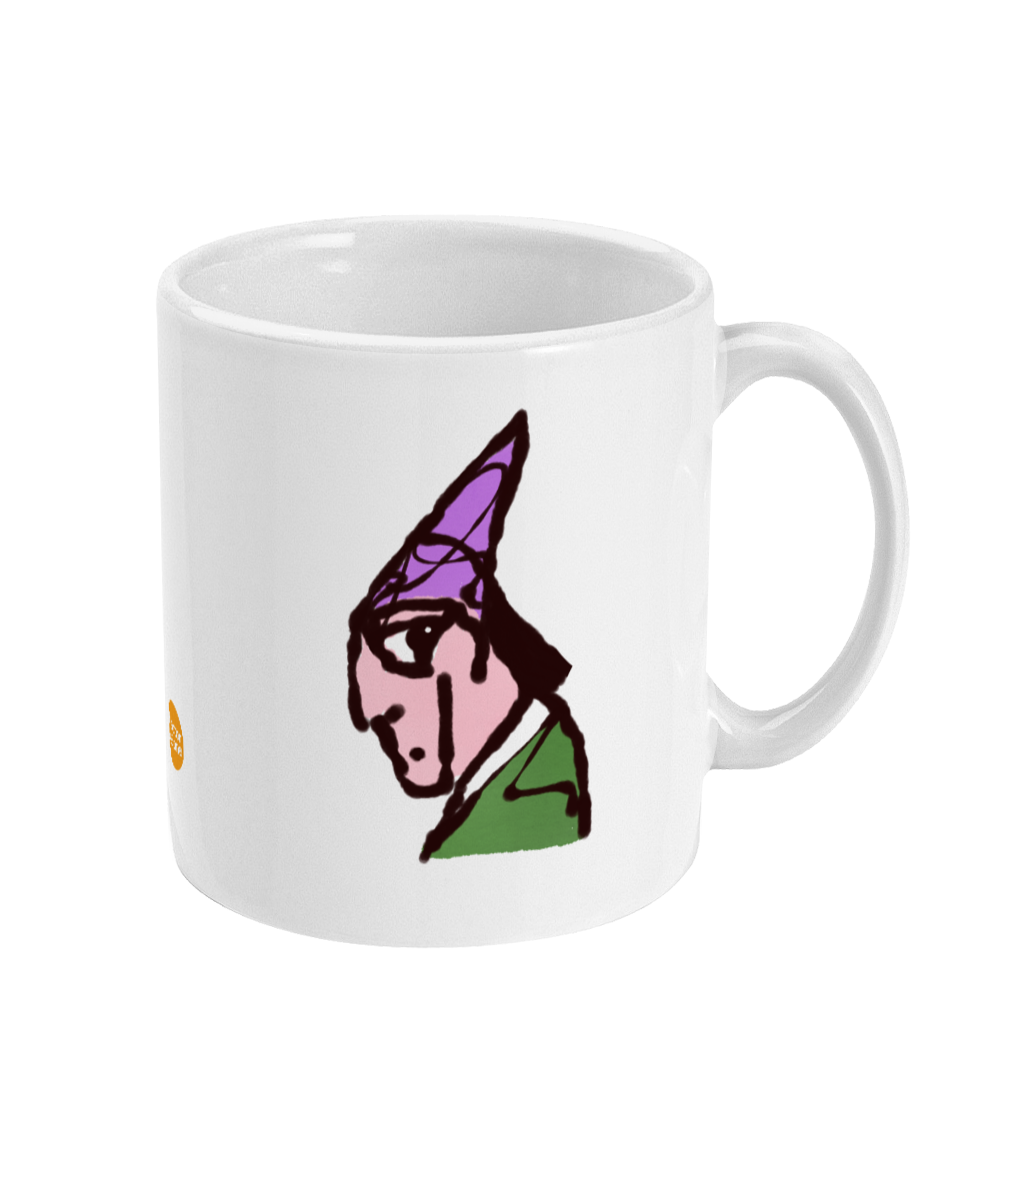 Wizard mug design - Original illustrated Wizard coffee mugs by Hector and Bone - Right View